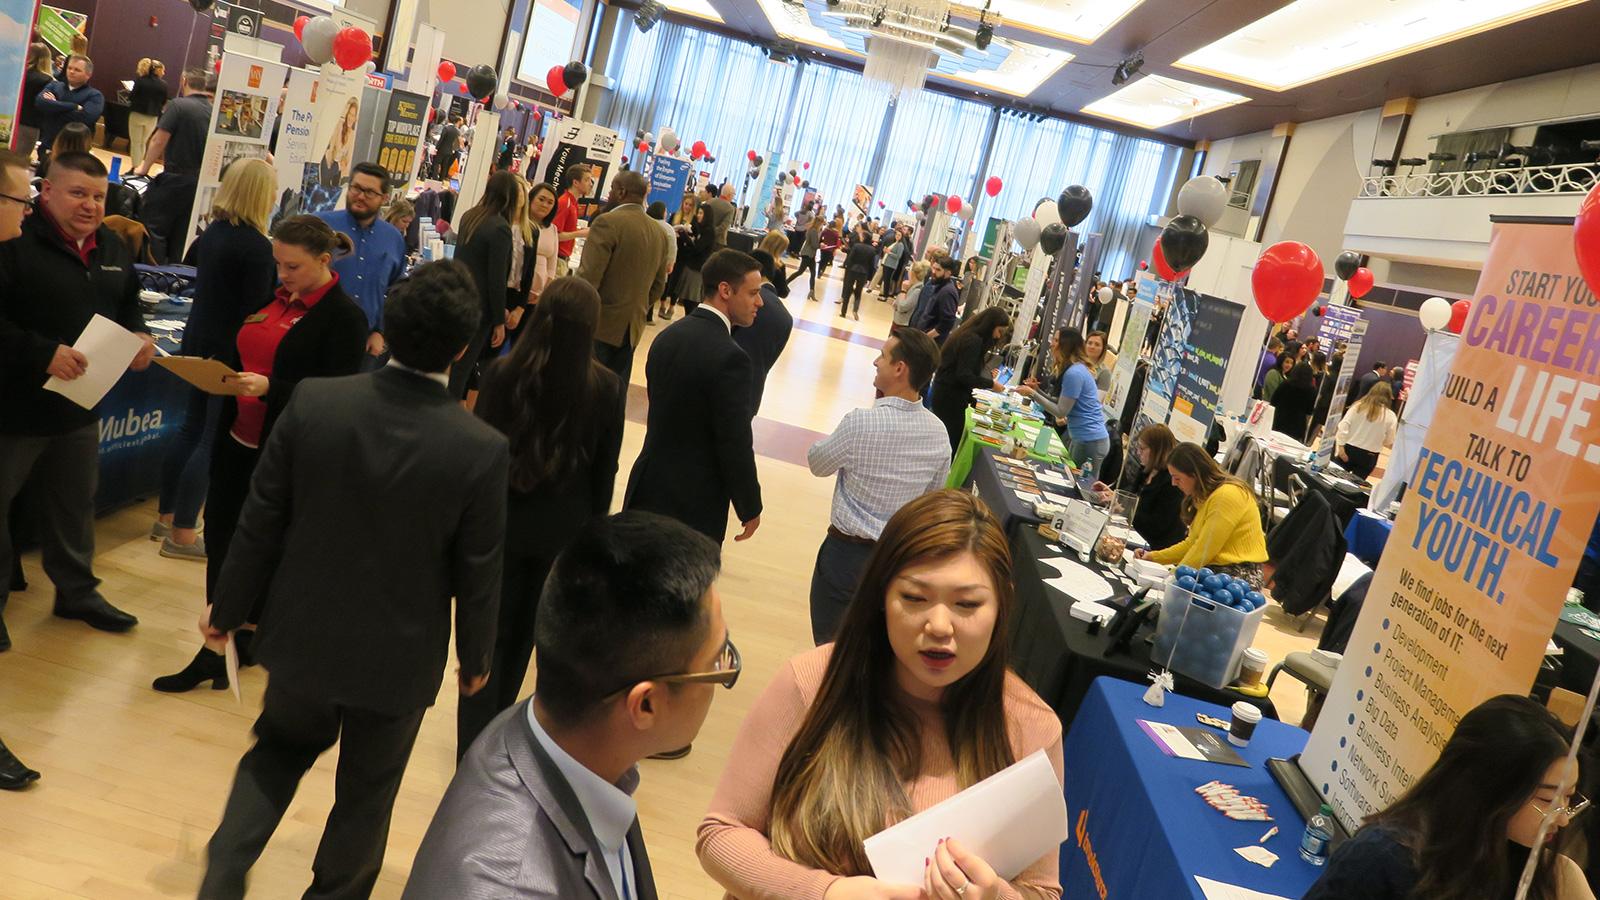 A crowded aisle during the Spring Career Fair